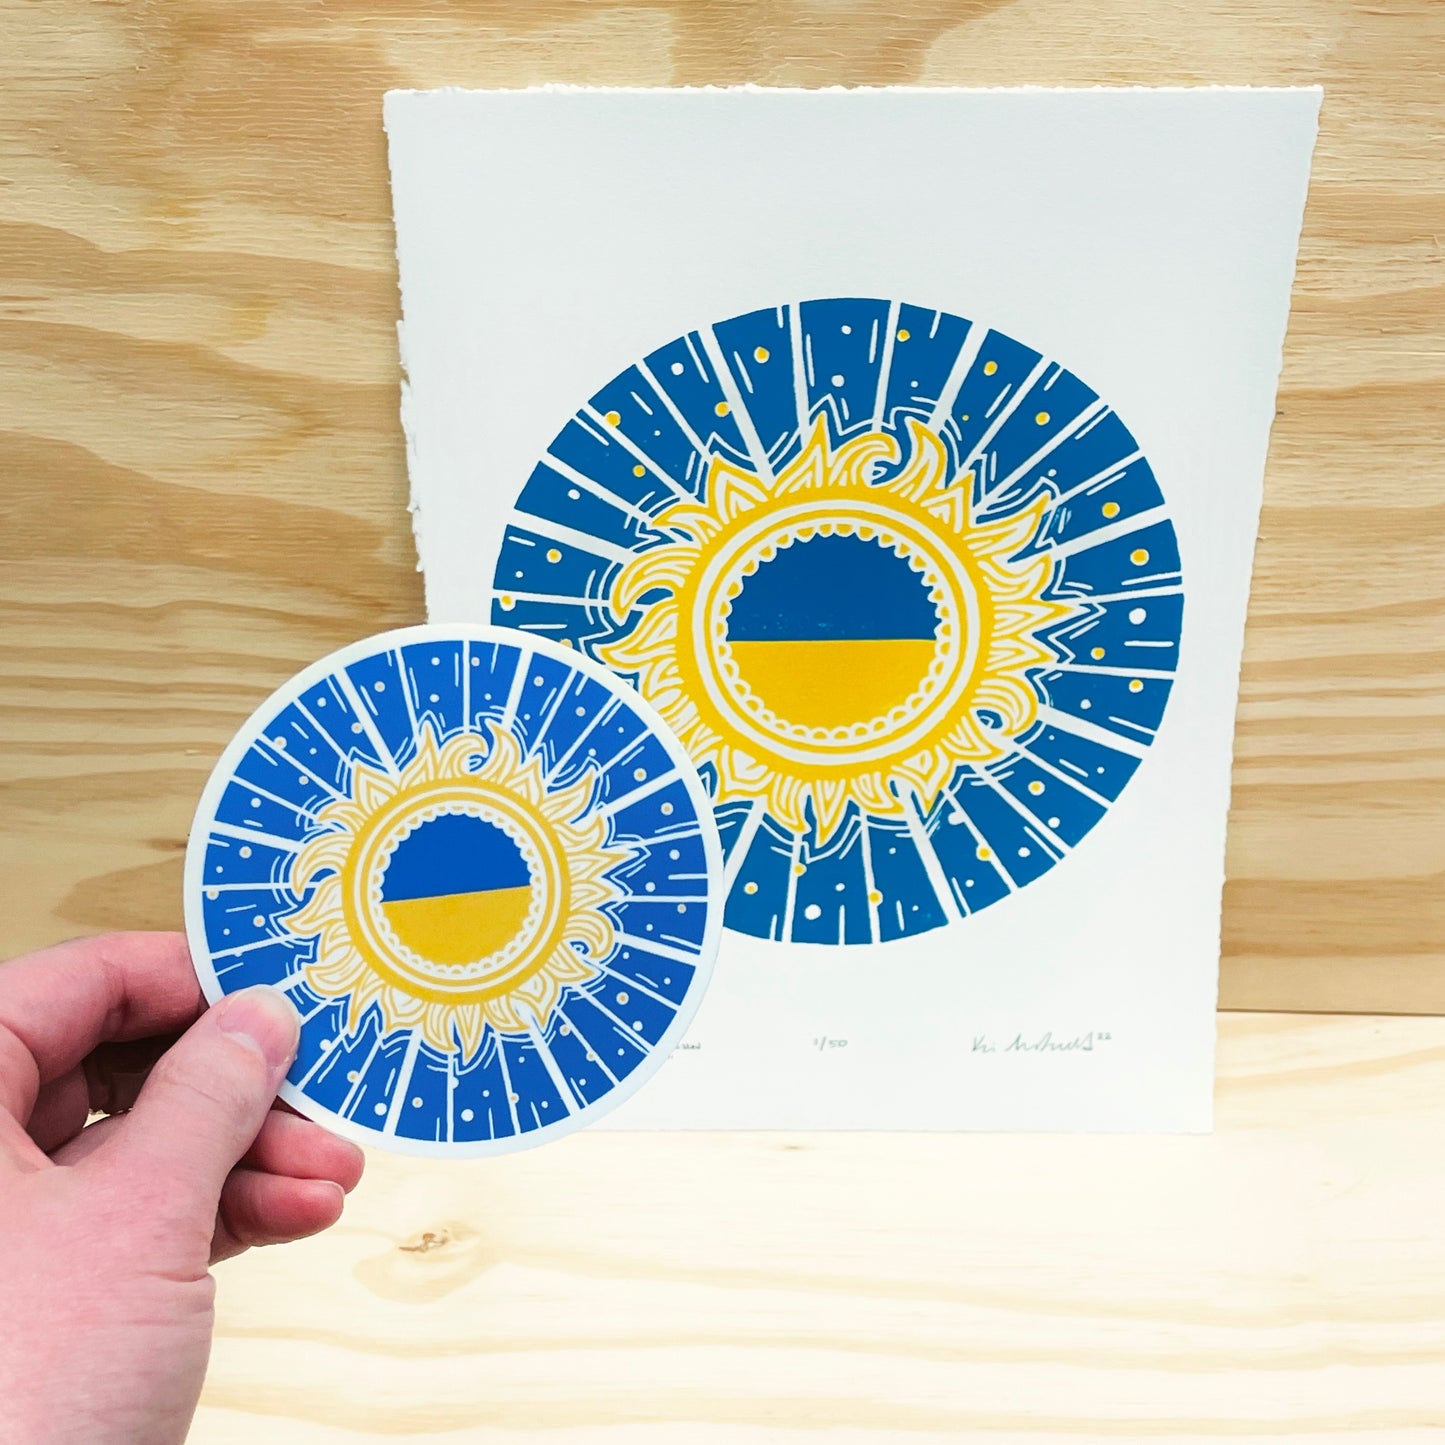 You Are the Yellow Sun in the Blue Sky - 3.5" Circle Vinyl Sticker for Brovary, Ukraine